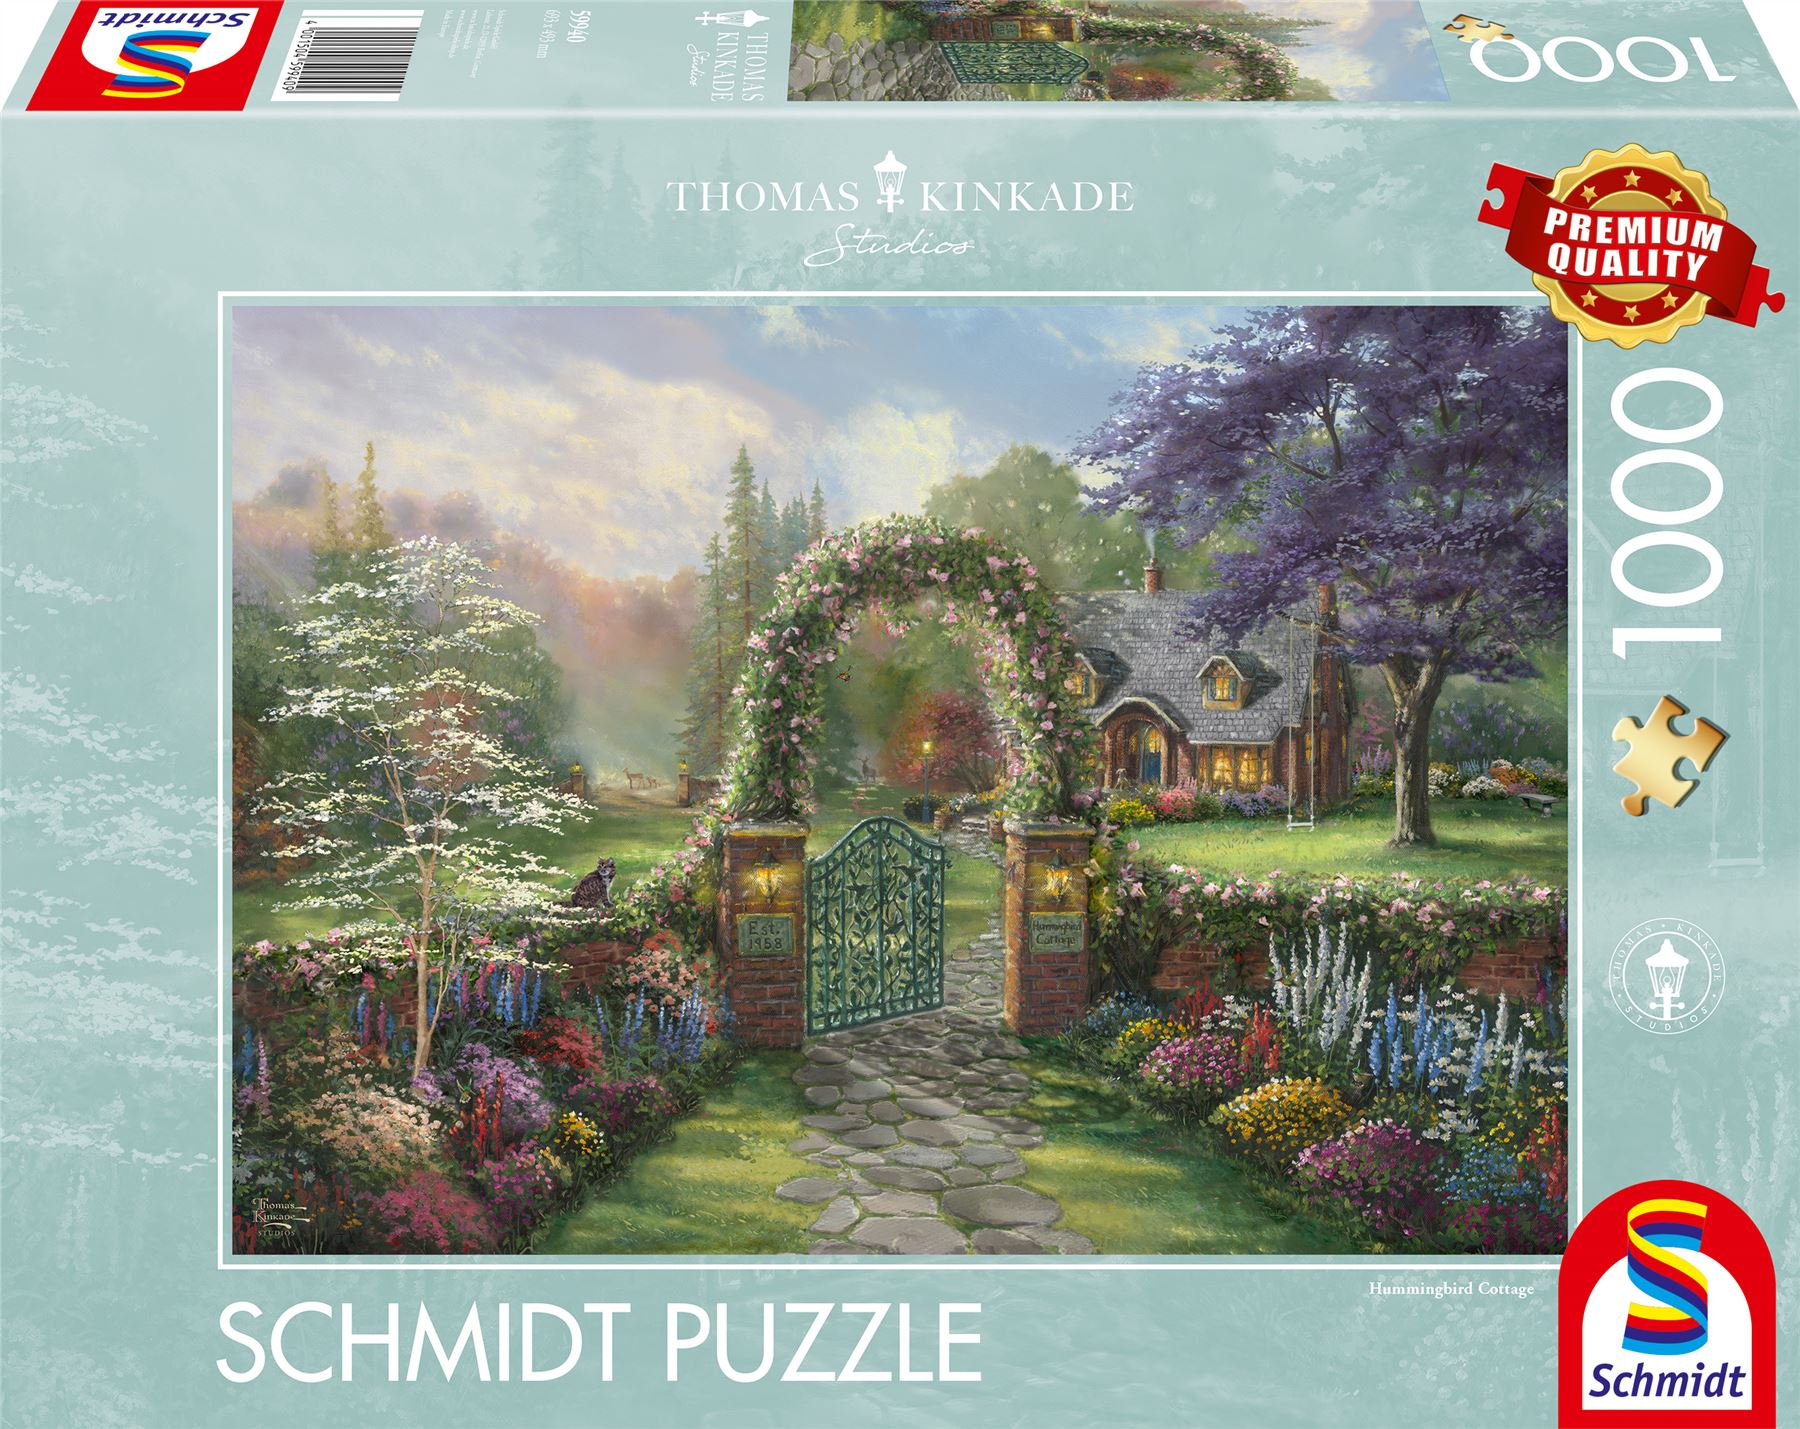 Wooden Jigsaw Puzzle 1000 Pieces, Hummingbird and Flower, Unique Puzzle